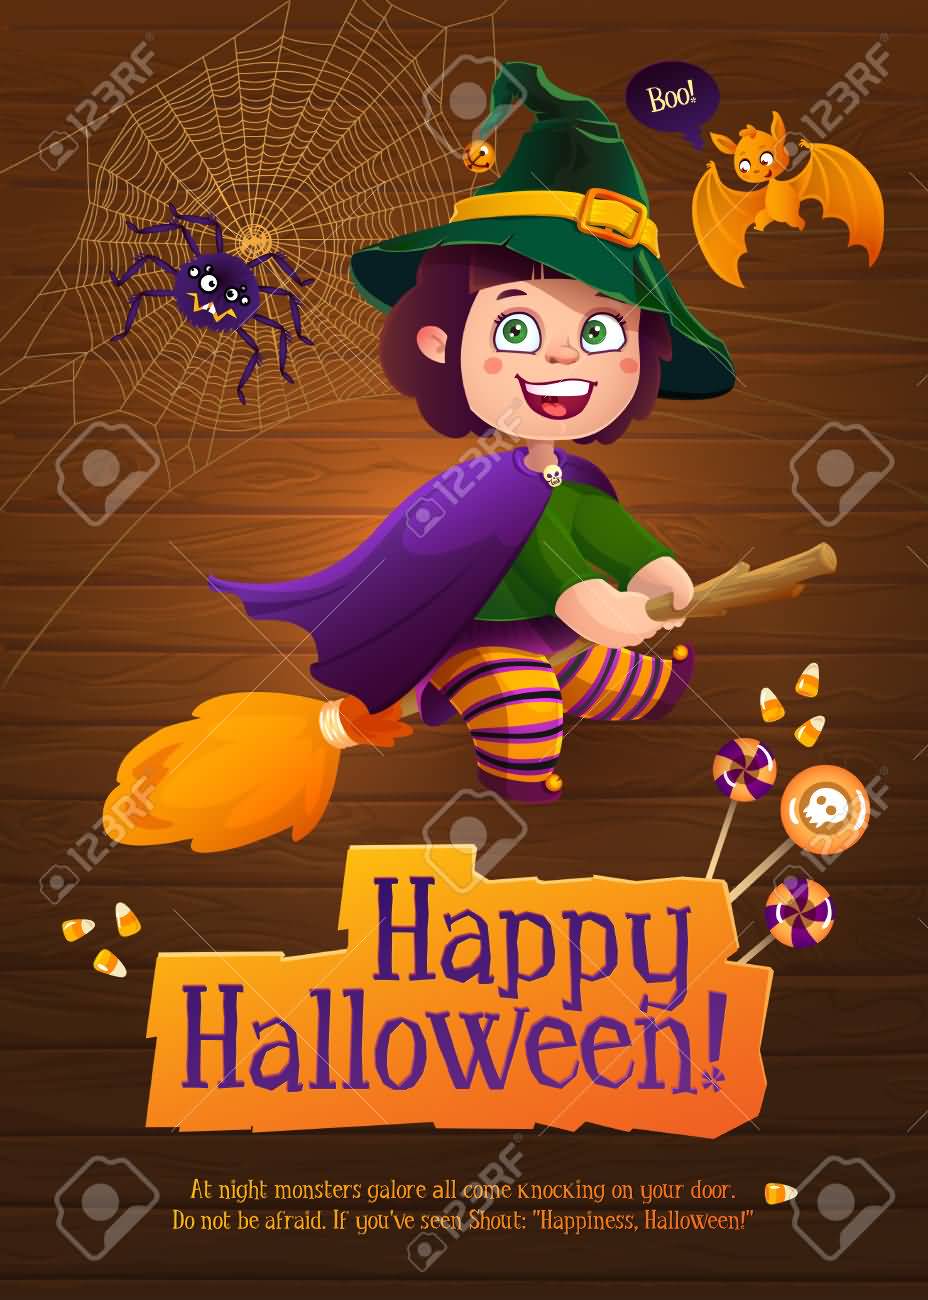 Happy Halloween At Night Monsters Galore All Come Knocking On Your Door. Do Not Be Afraid If You've Seen Shout Happiness Halloween Greeting Card